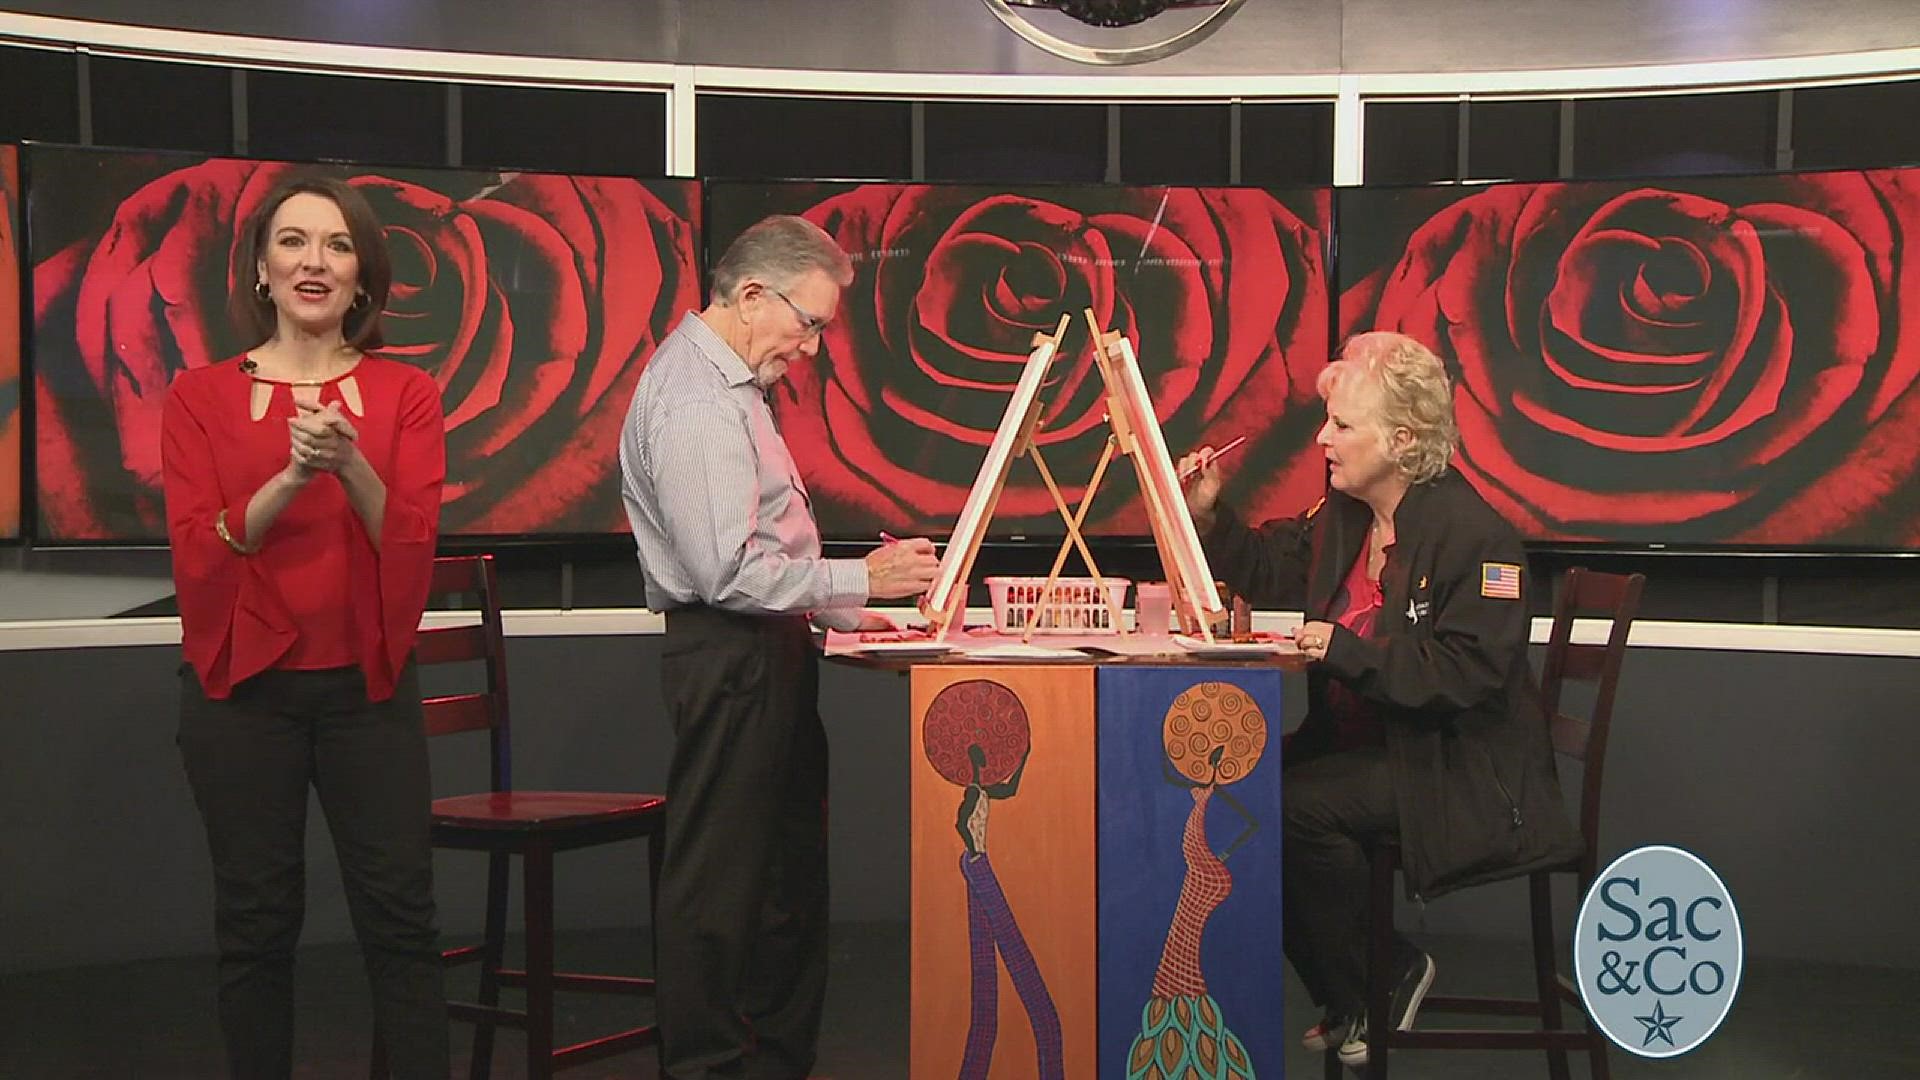 Make this Valentine's Day memorable by painting a portrait of your mate at this fun event!